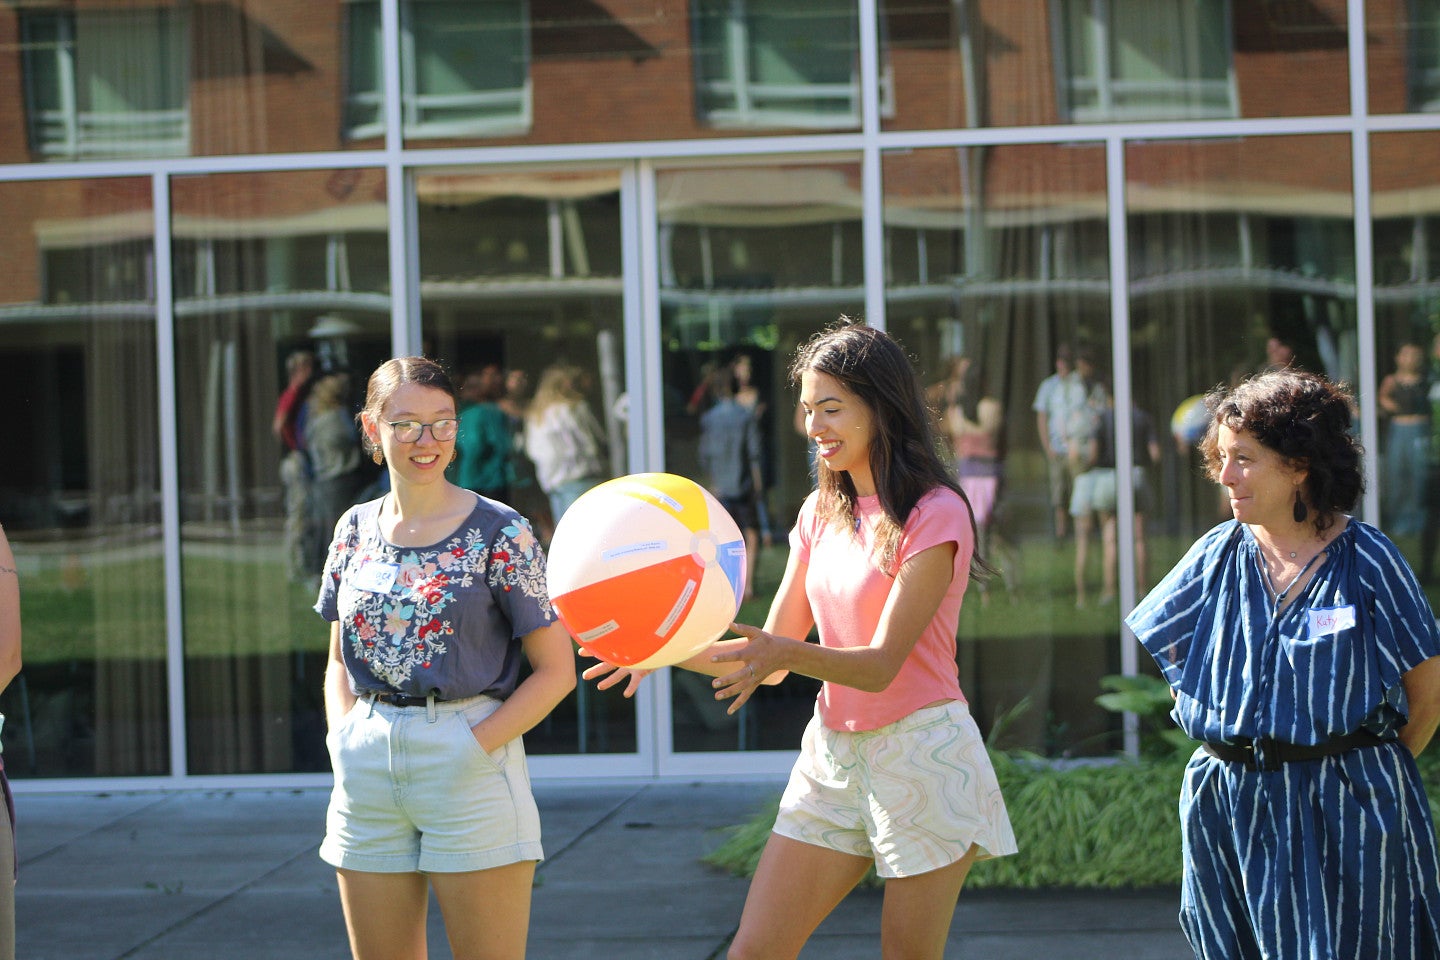 RARE cohort come together outside for a team building exercise that includes a beach ball. Three individuals are pictured. 